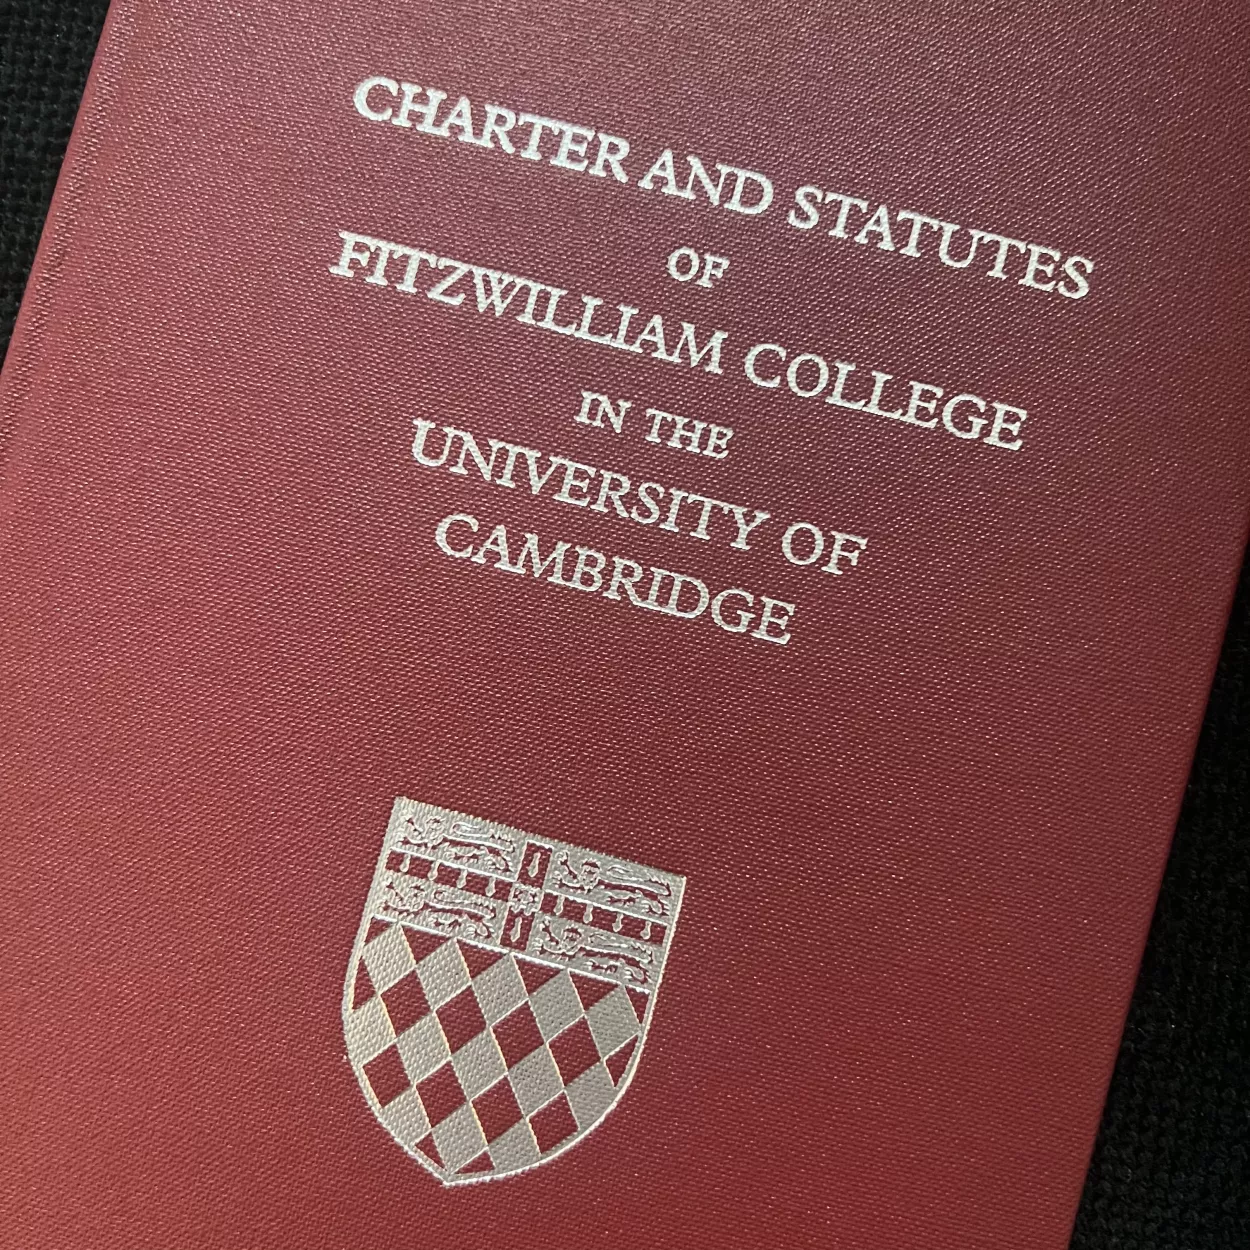 A dark maroon book with the title Charter and Statutes of Fitzwilliam College, in the University of Cambridge, in silver, with the college crest below